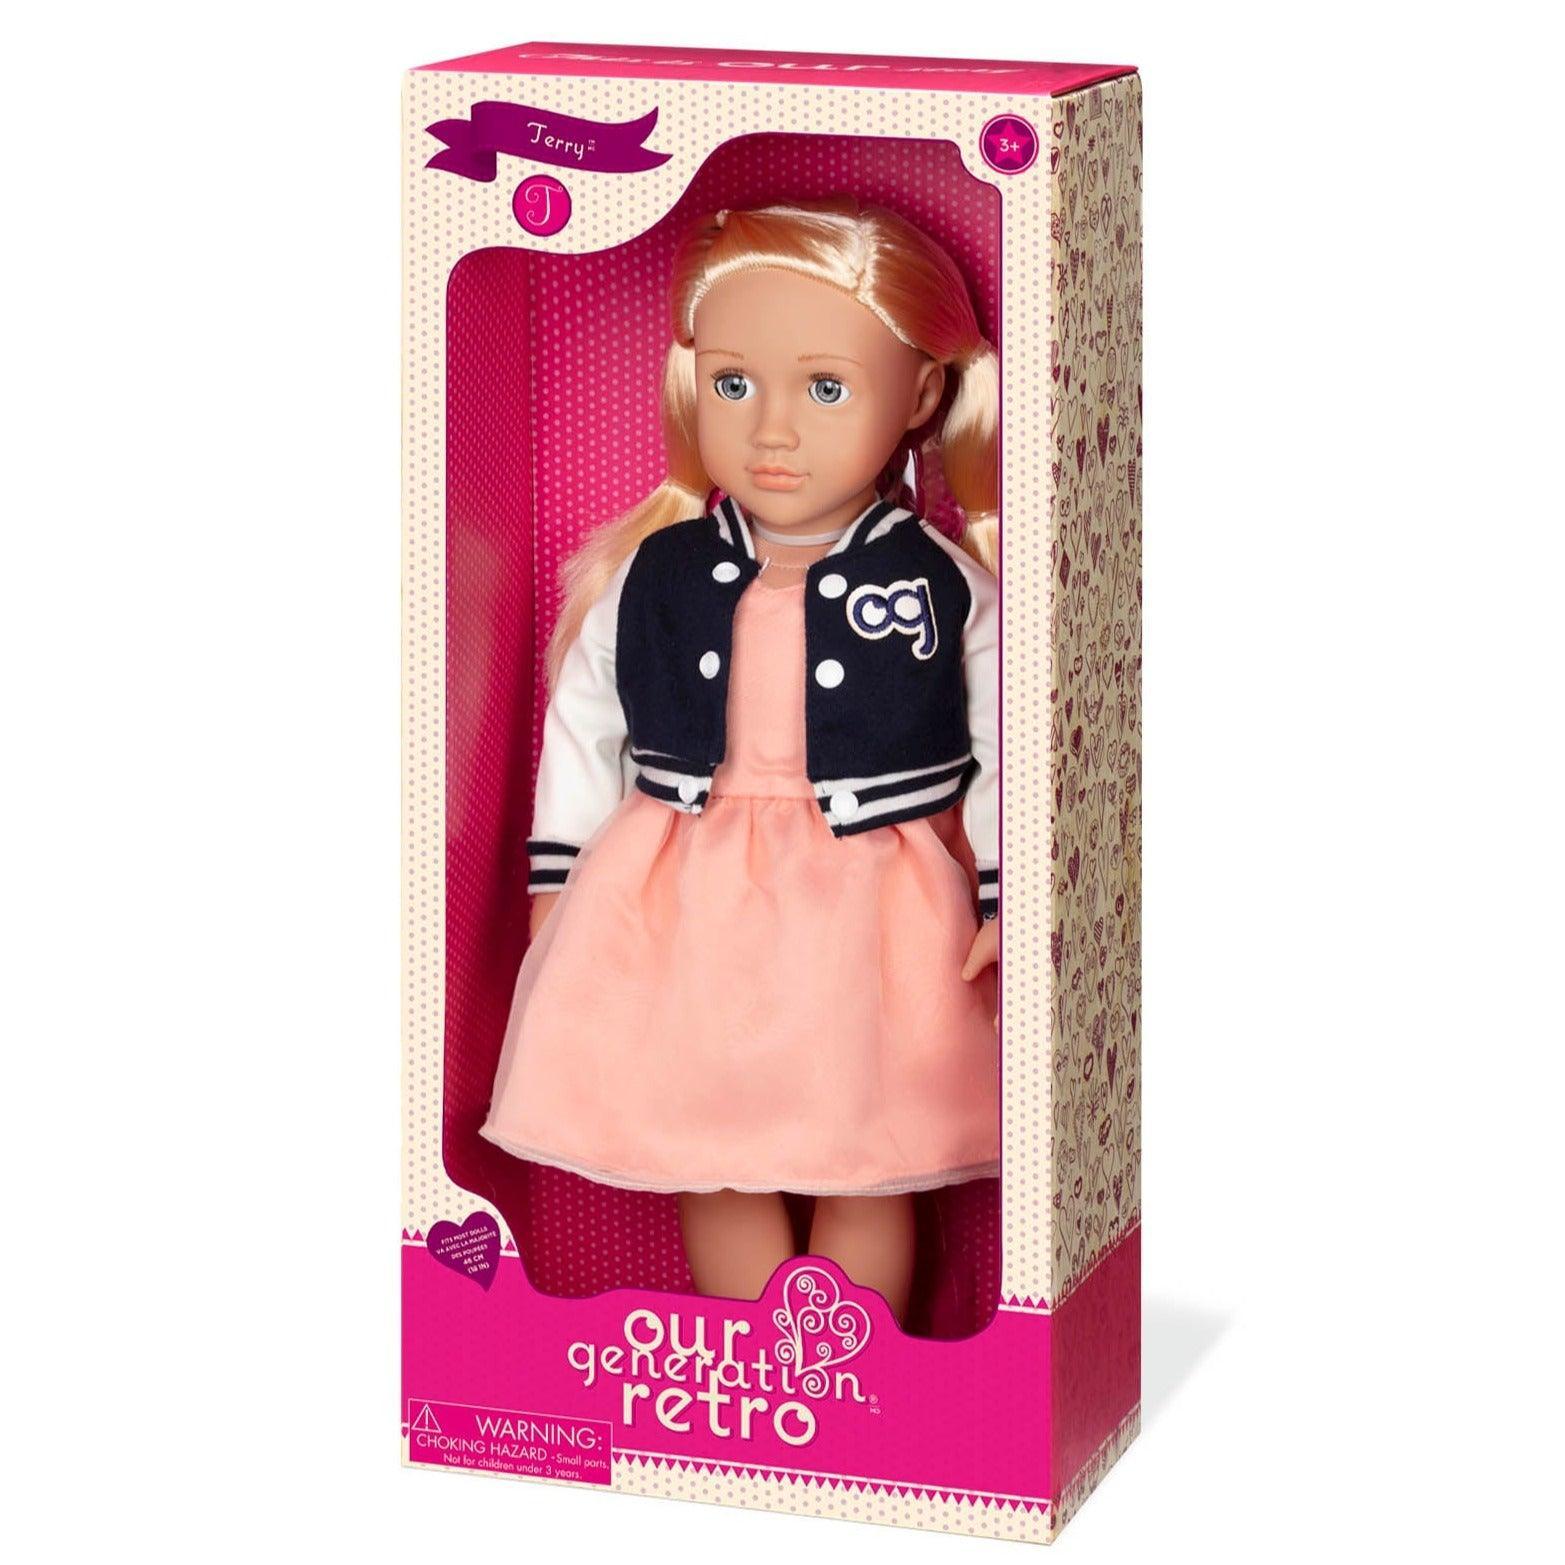 Our Generation: Terry retro doll 46 cm - Kidealo